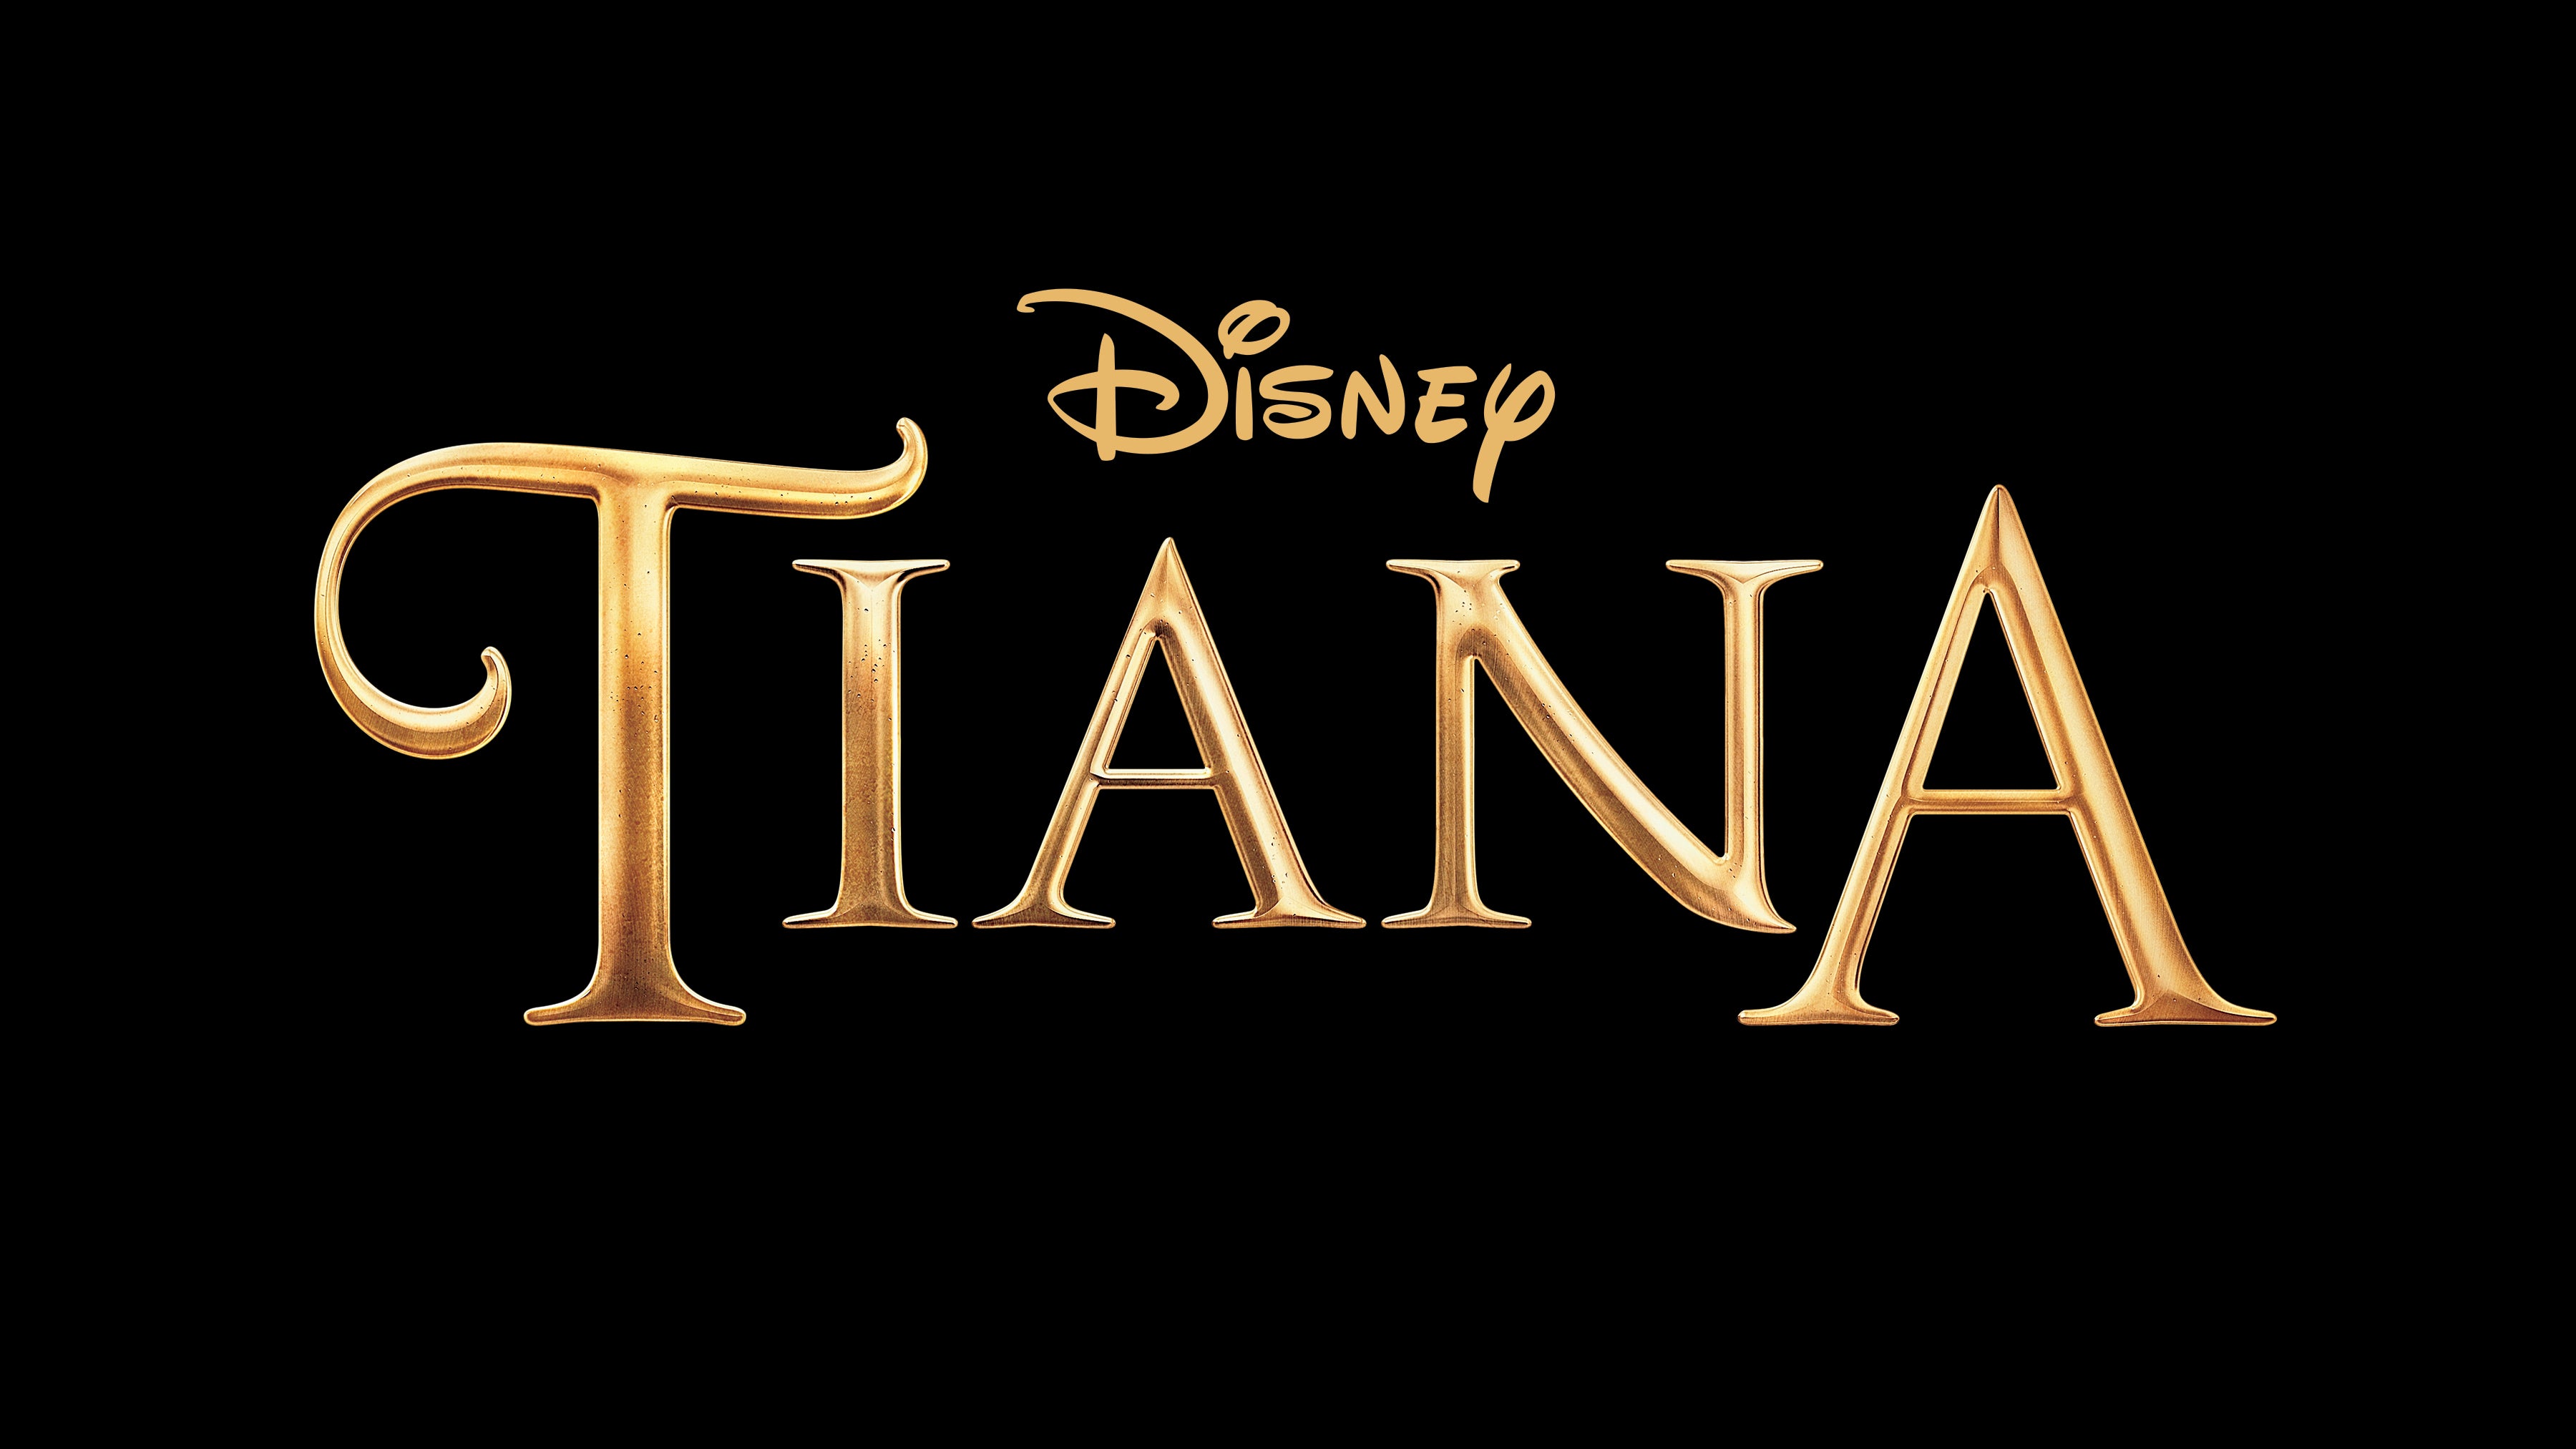 Tiana, Moana Animated Series Officially Announced for Disney Plus - IGN